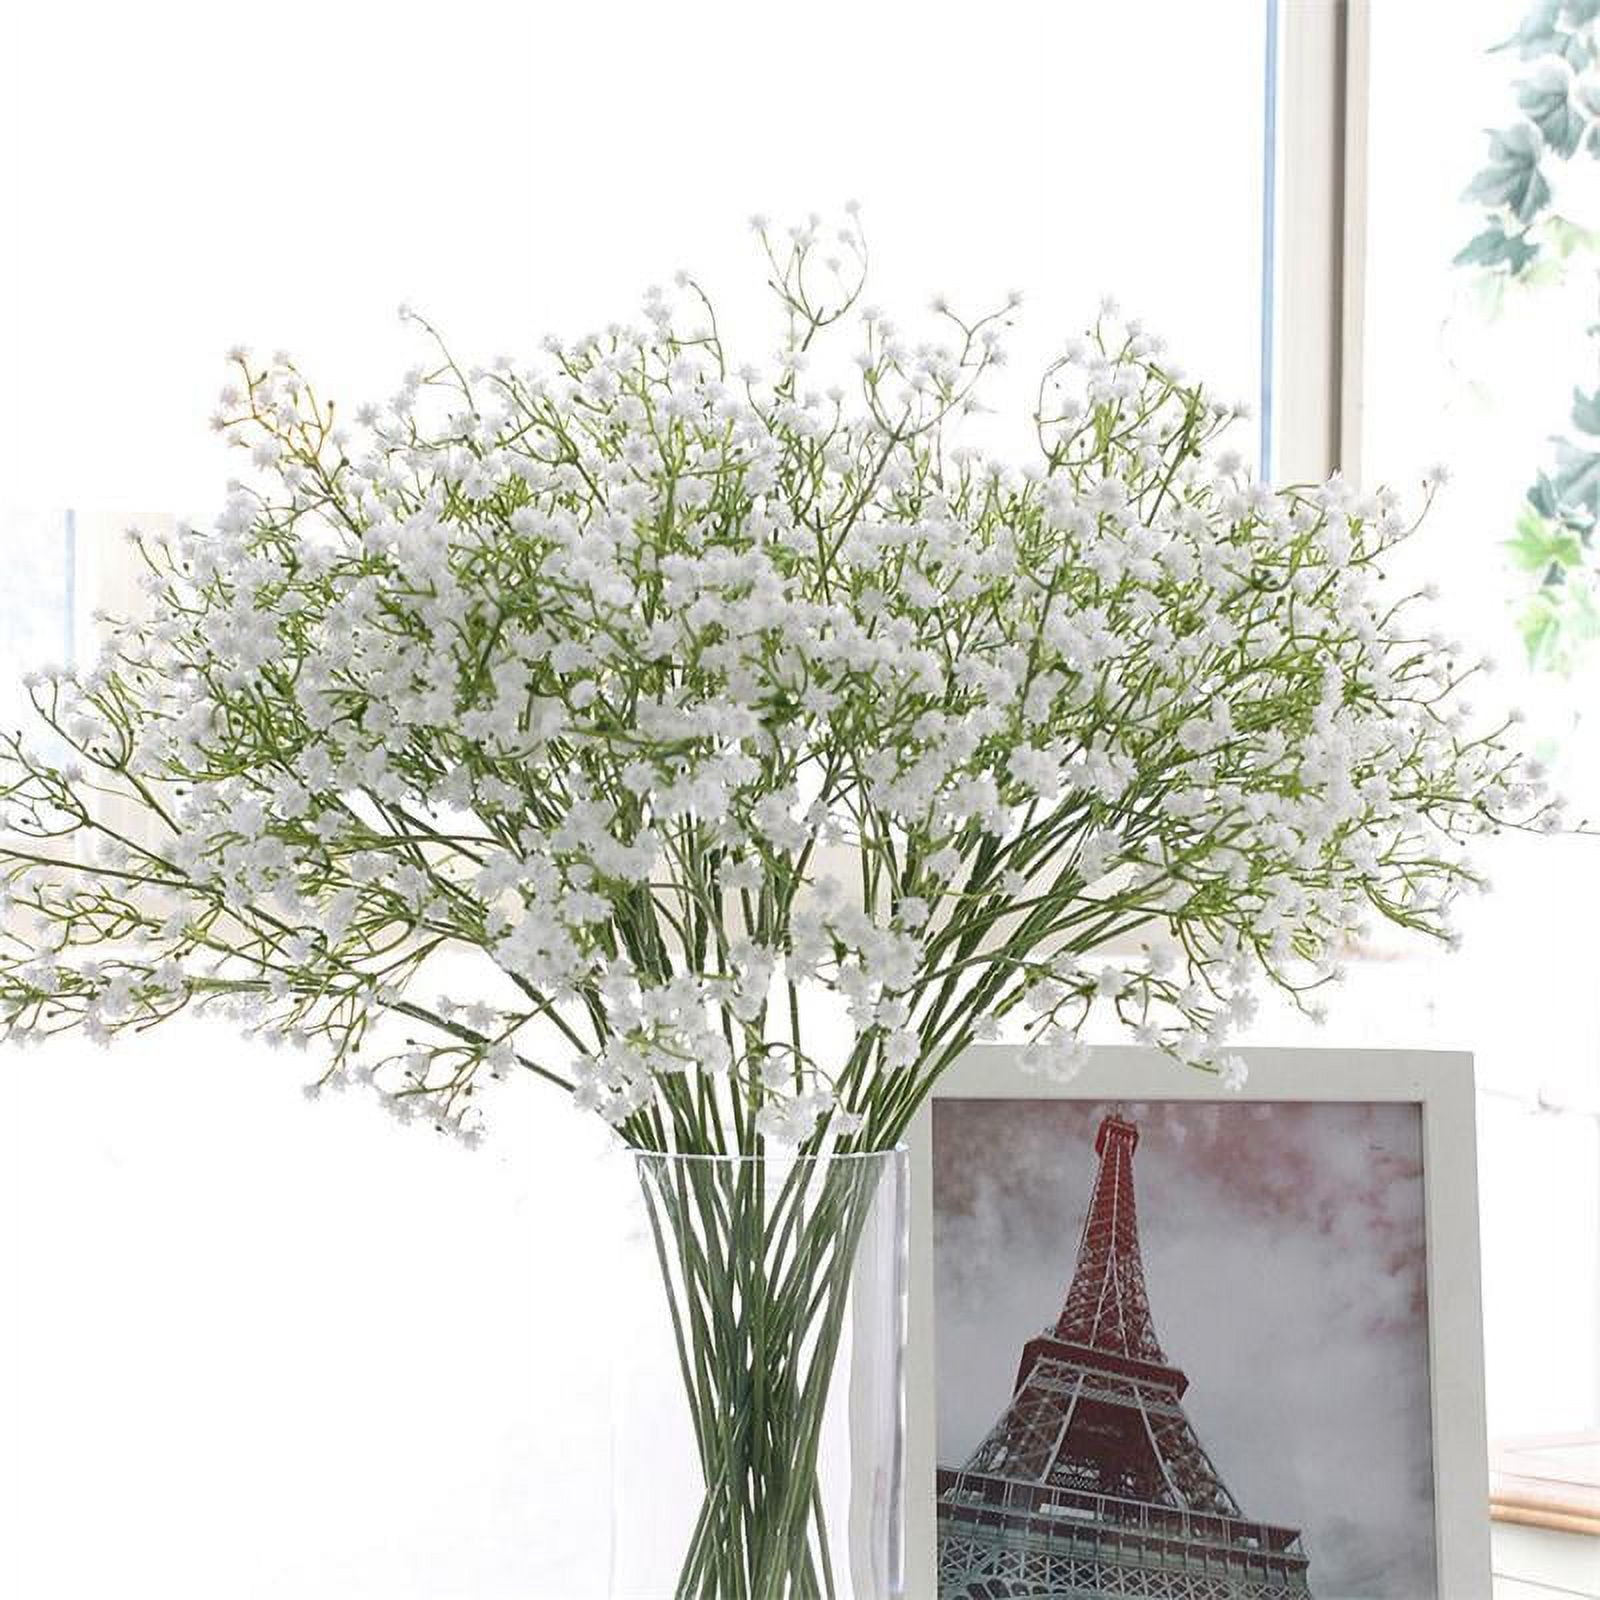 1/10pcs Artificial Baby Breath Flowers Gypsophila Real Touch Silk